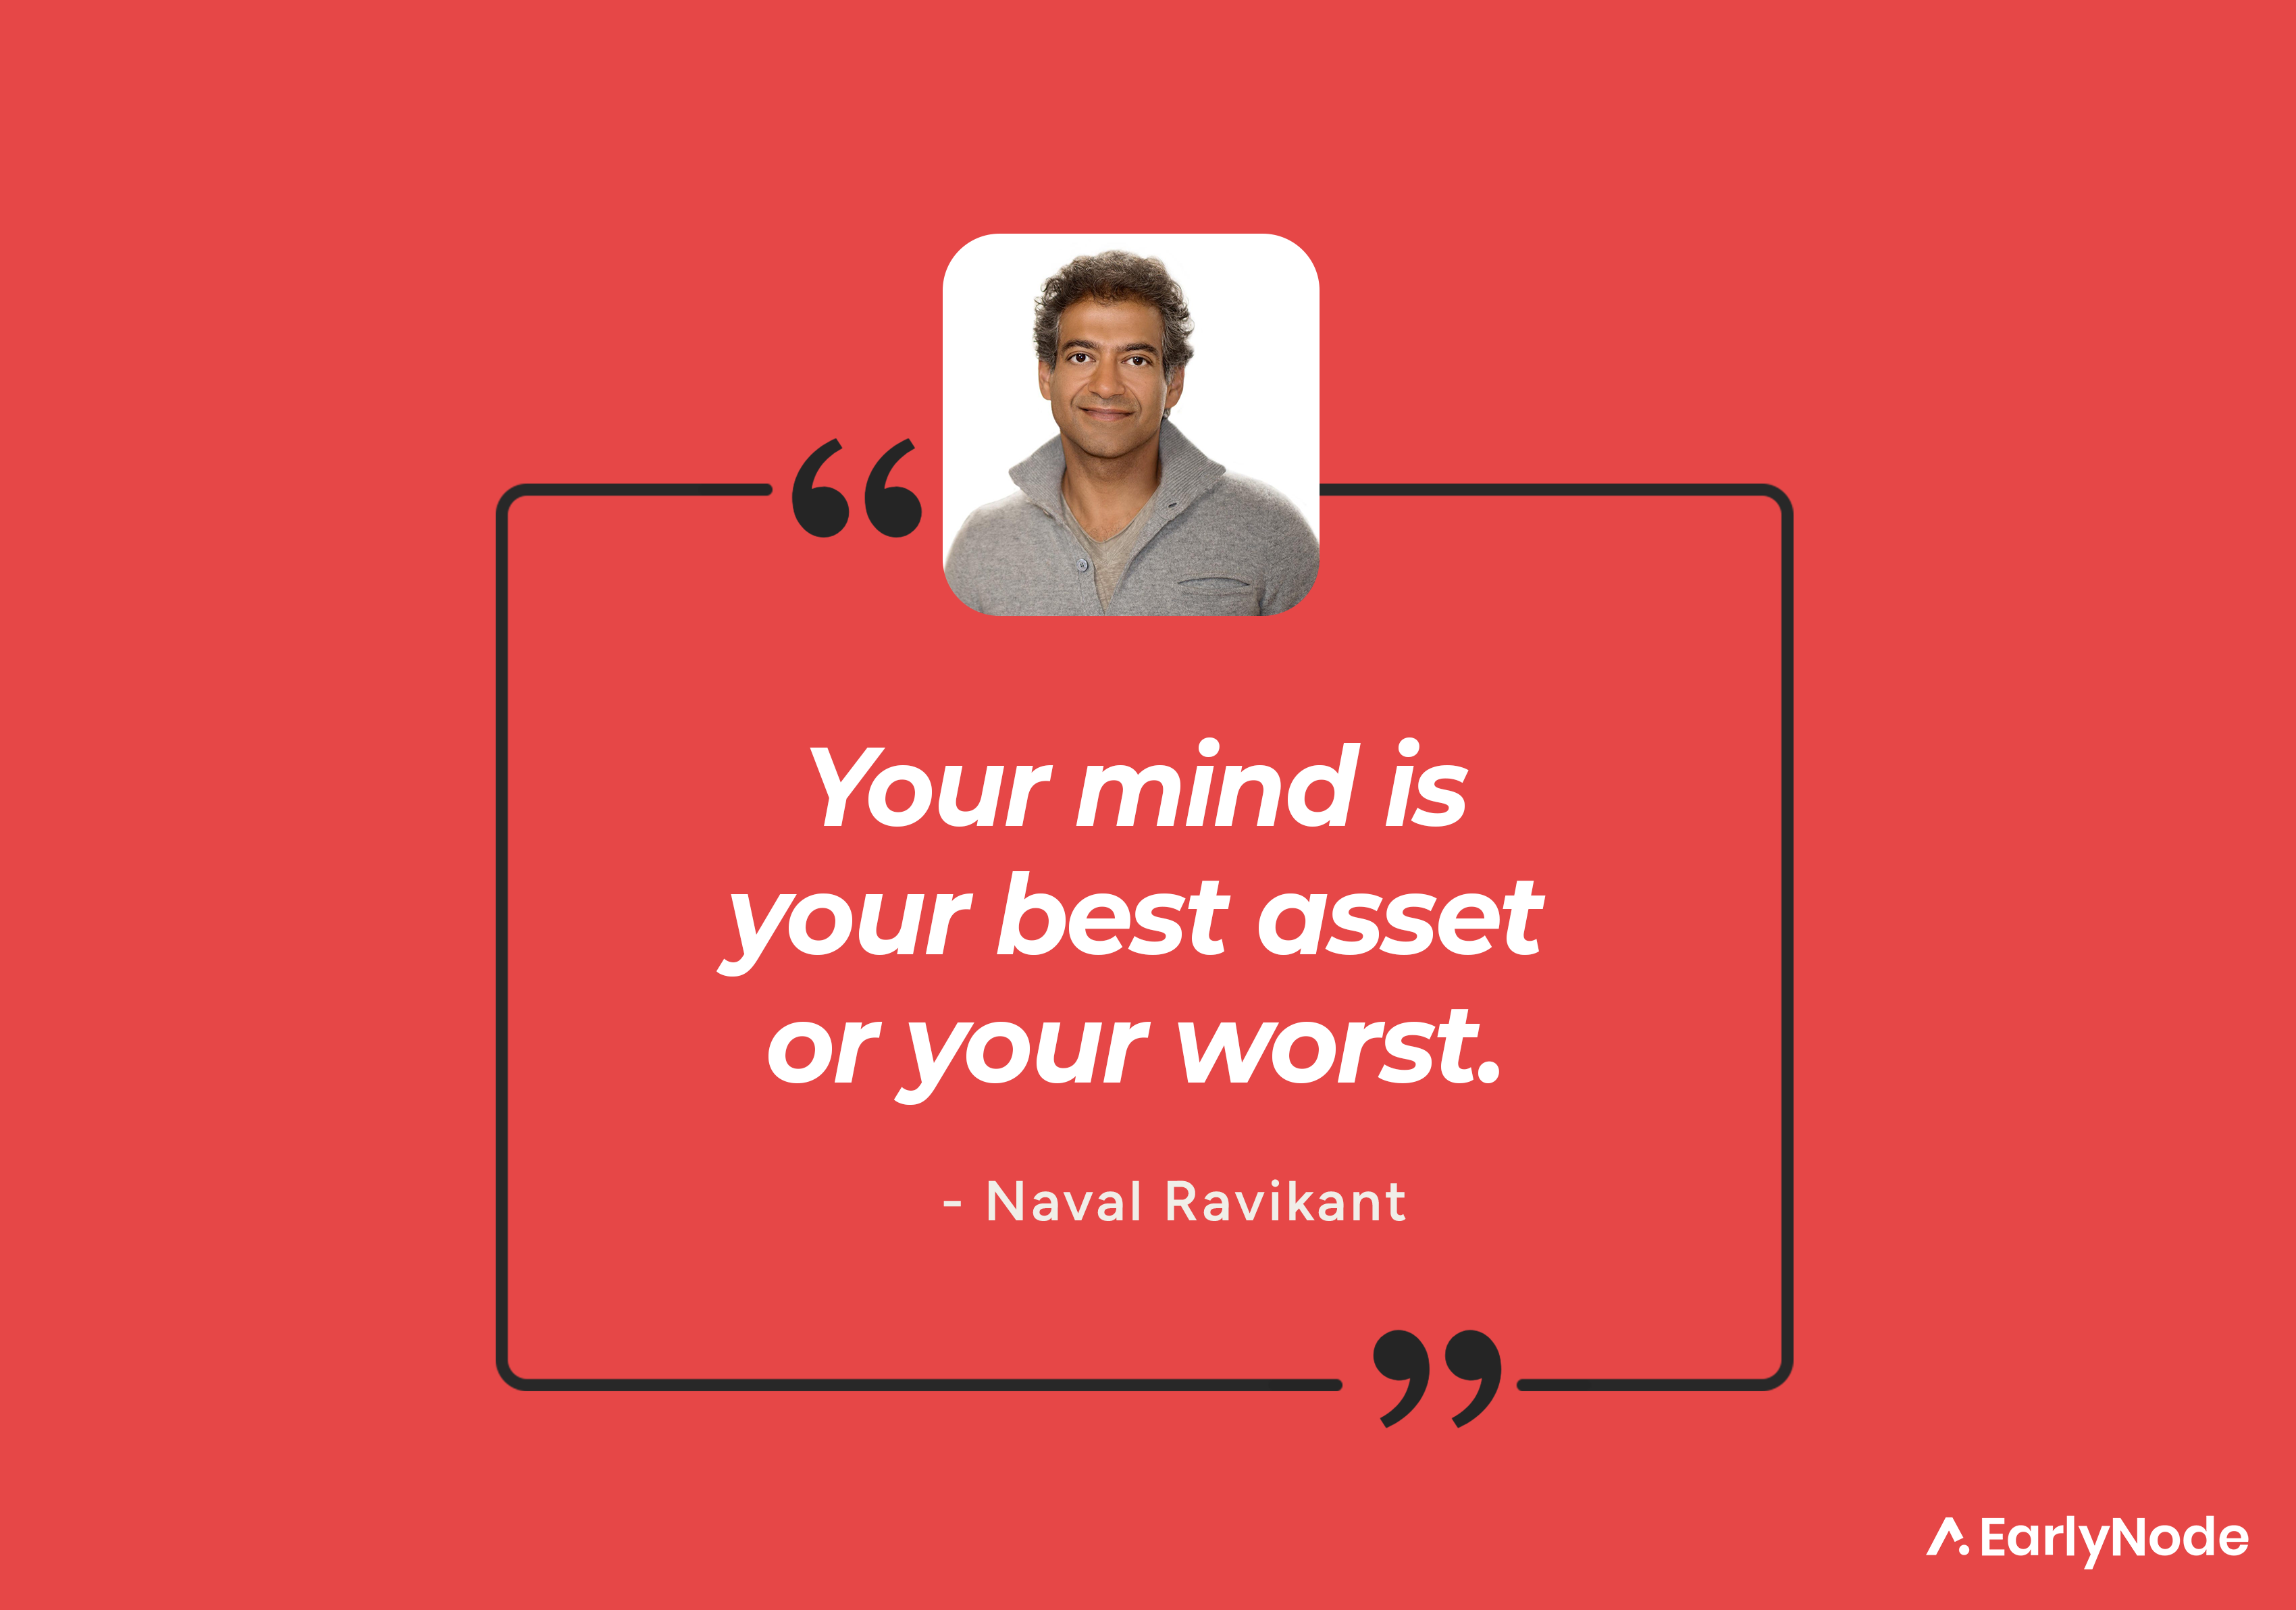 Top 10 Quotes by Naval Ravikant